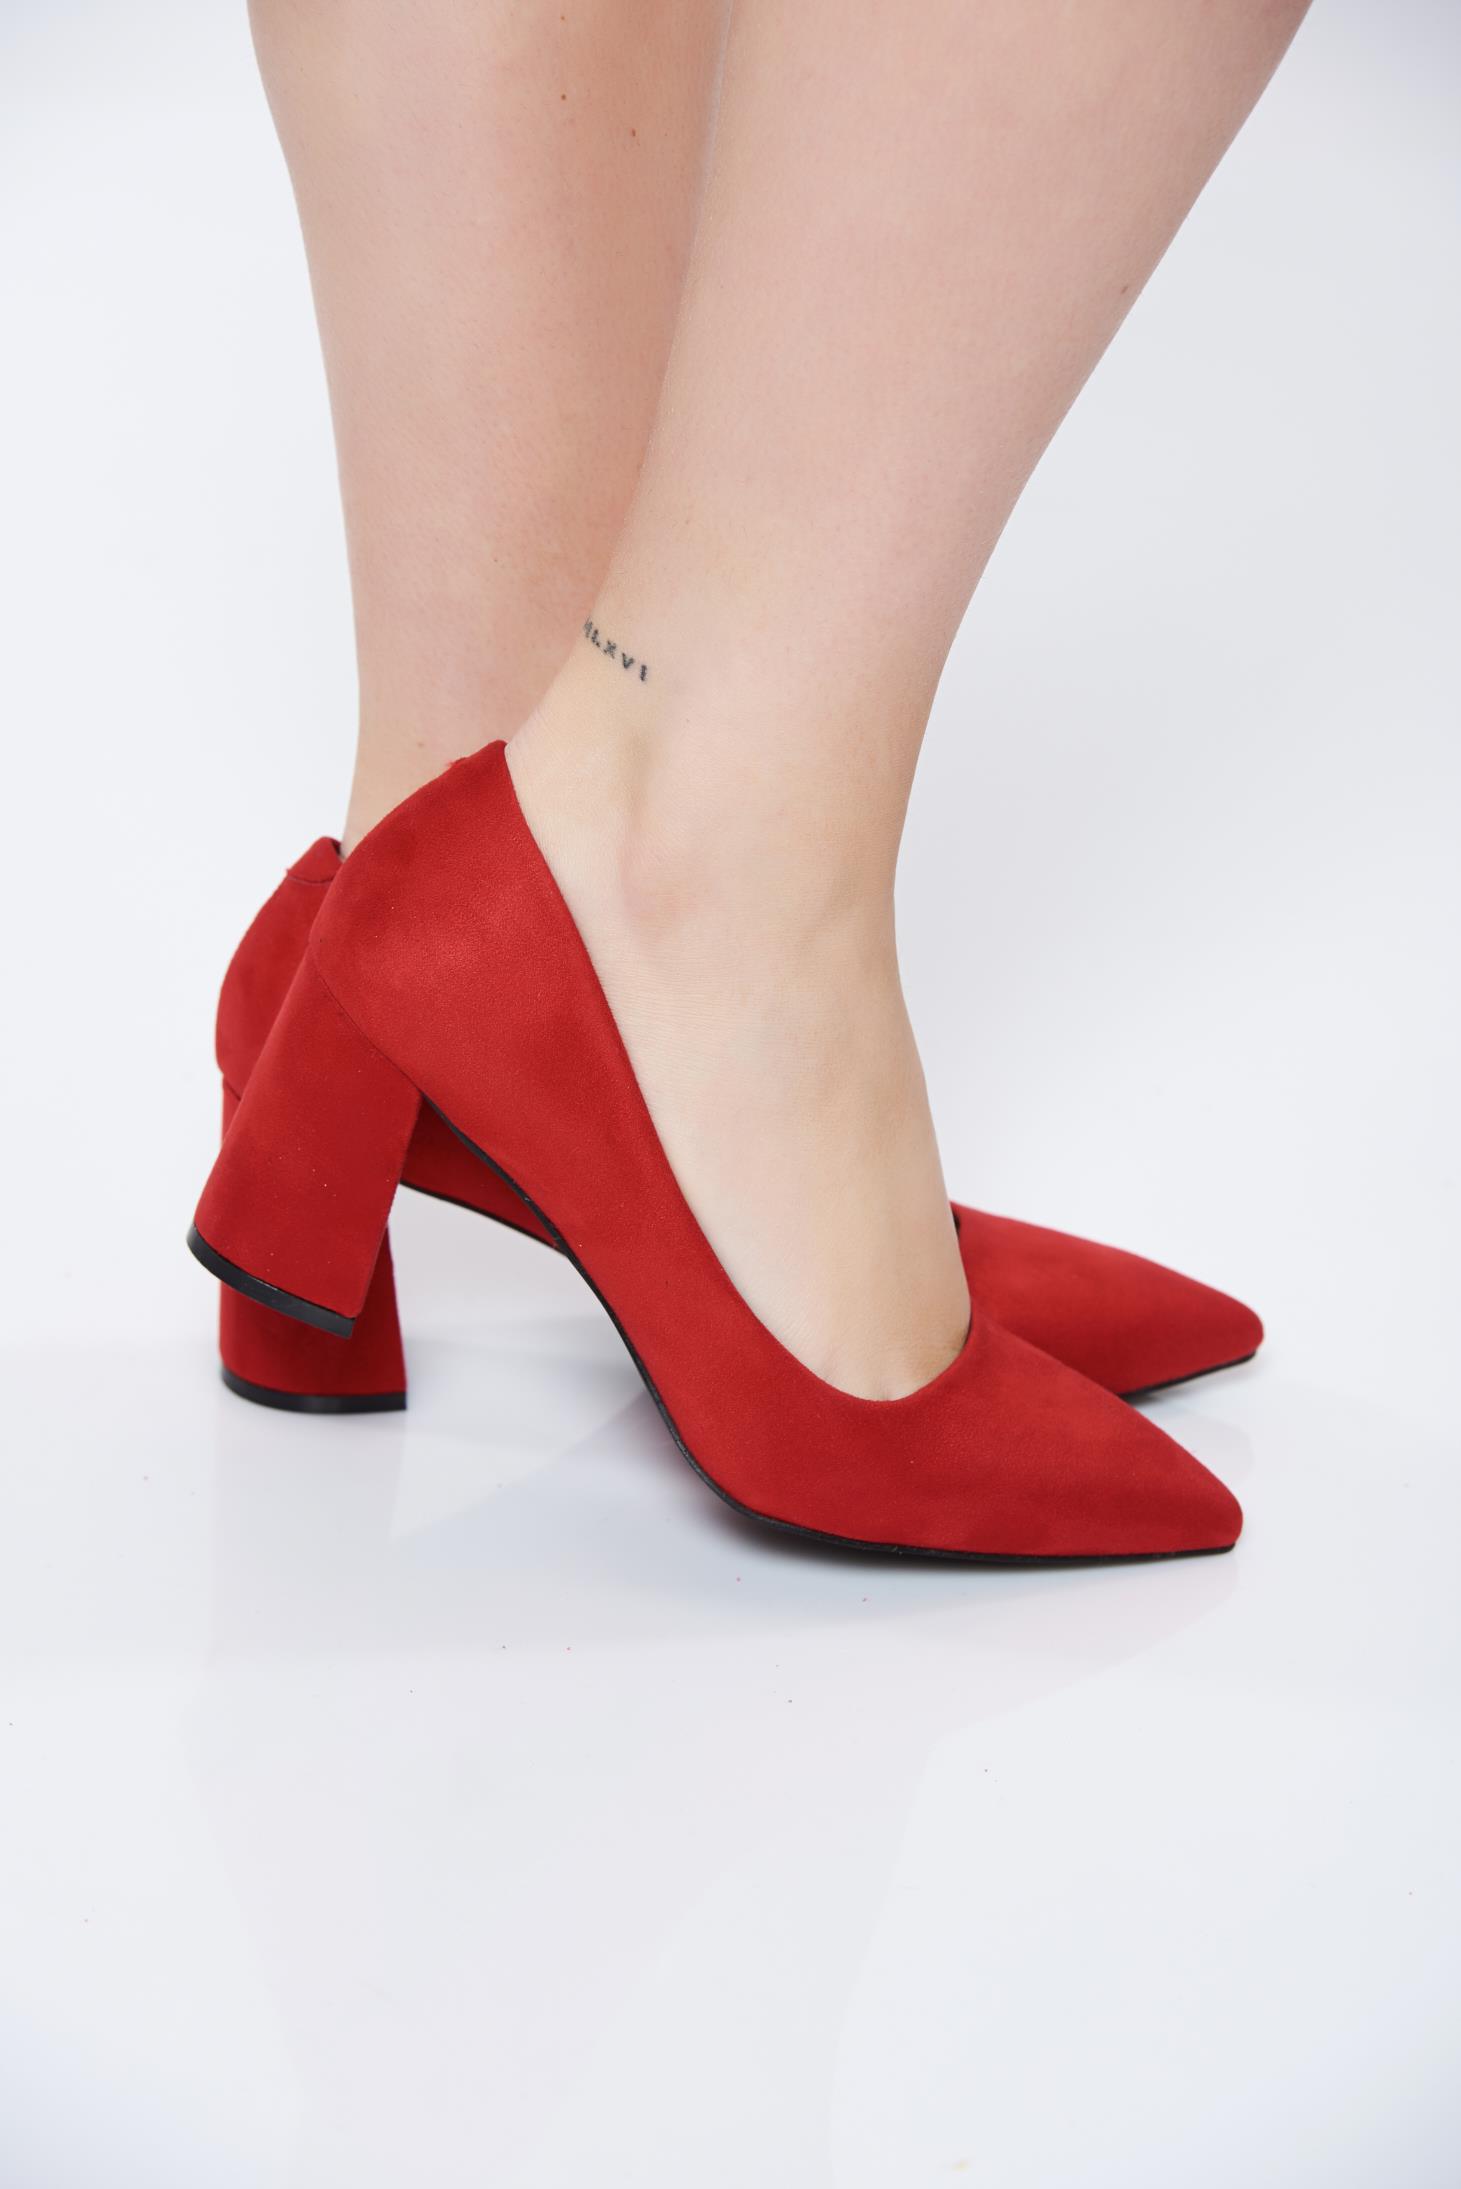 chunky red shoes